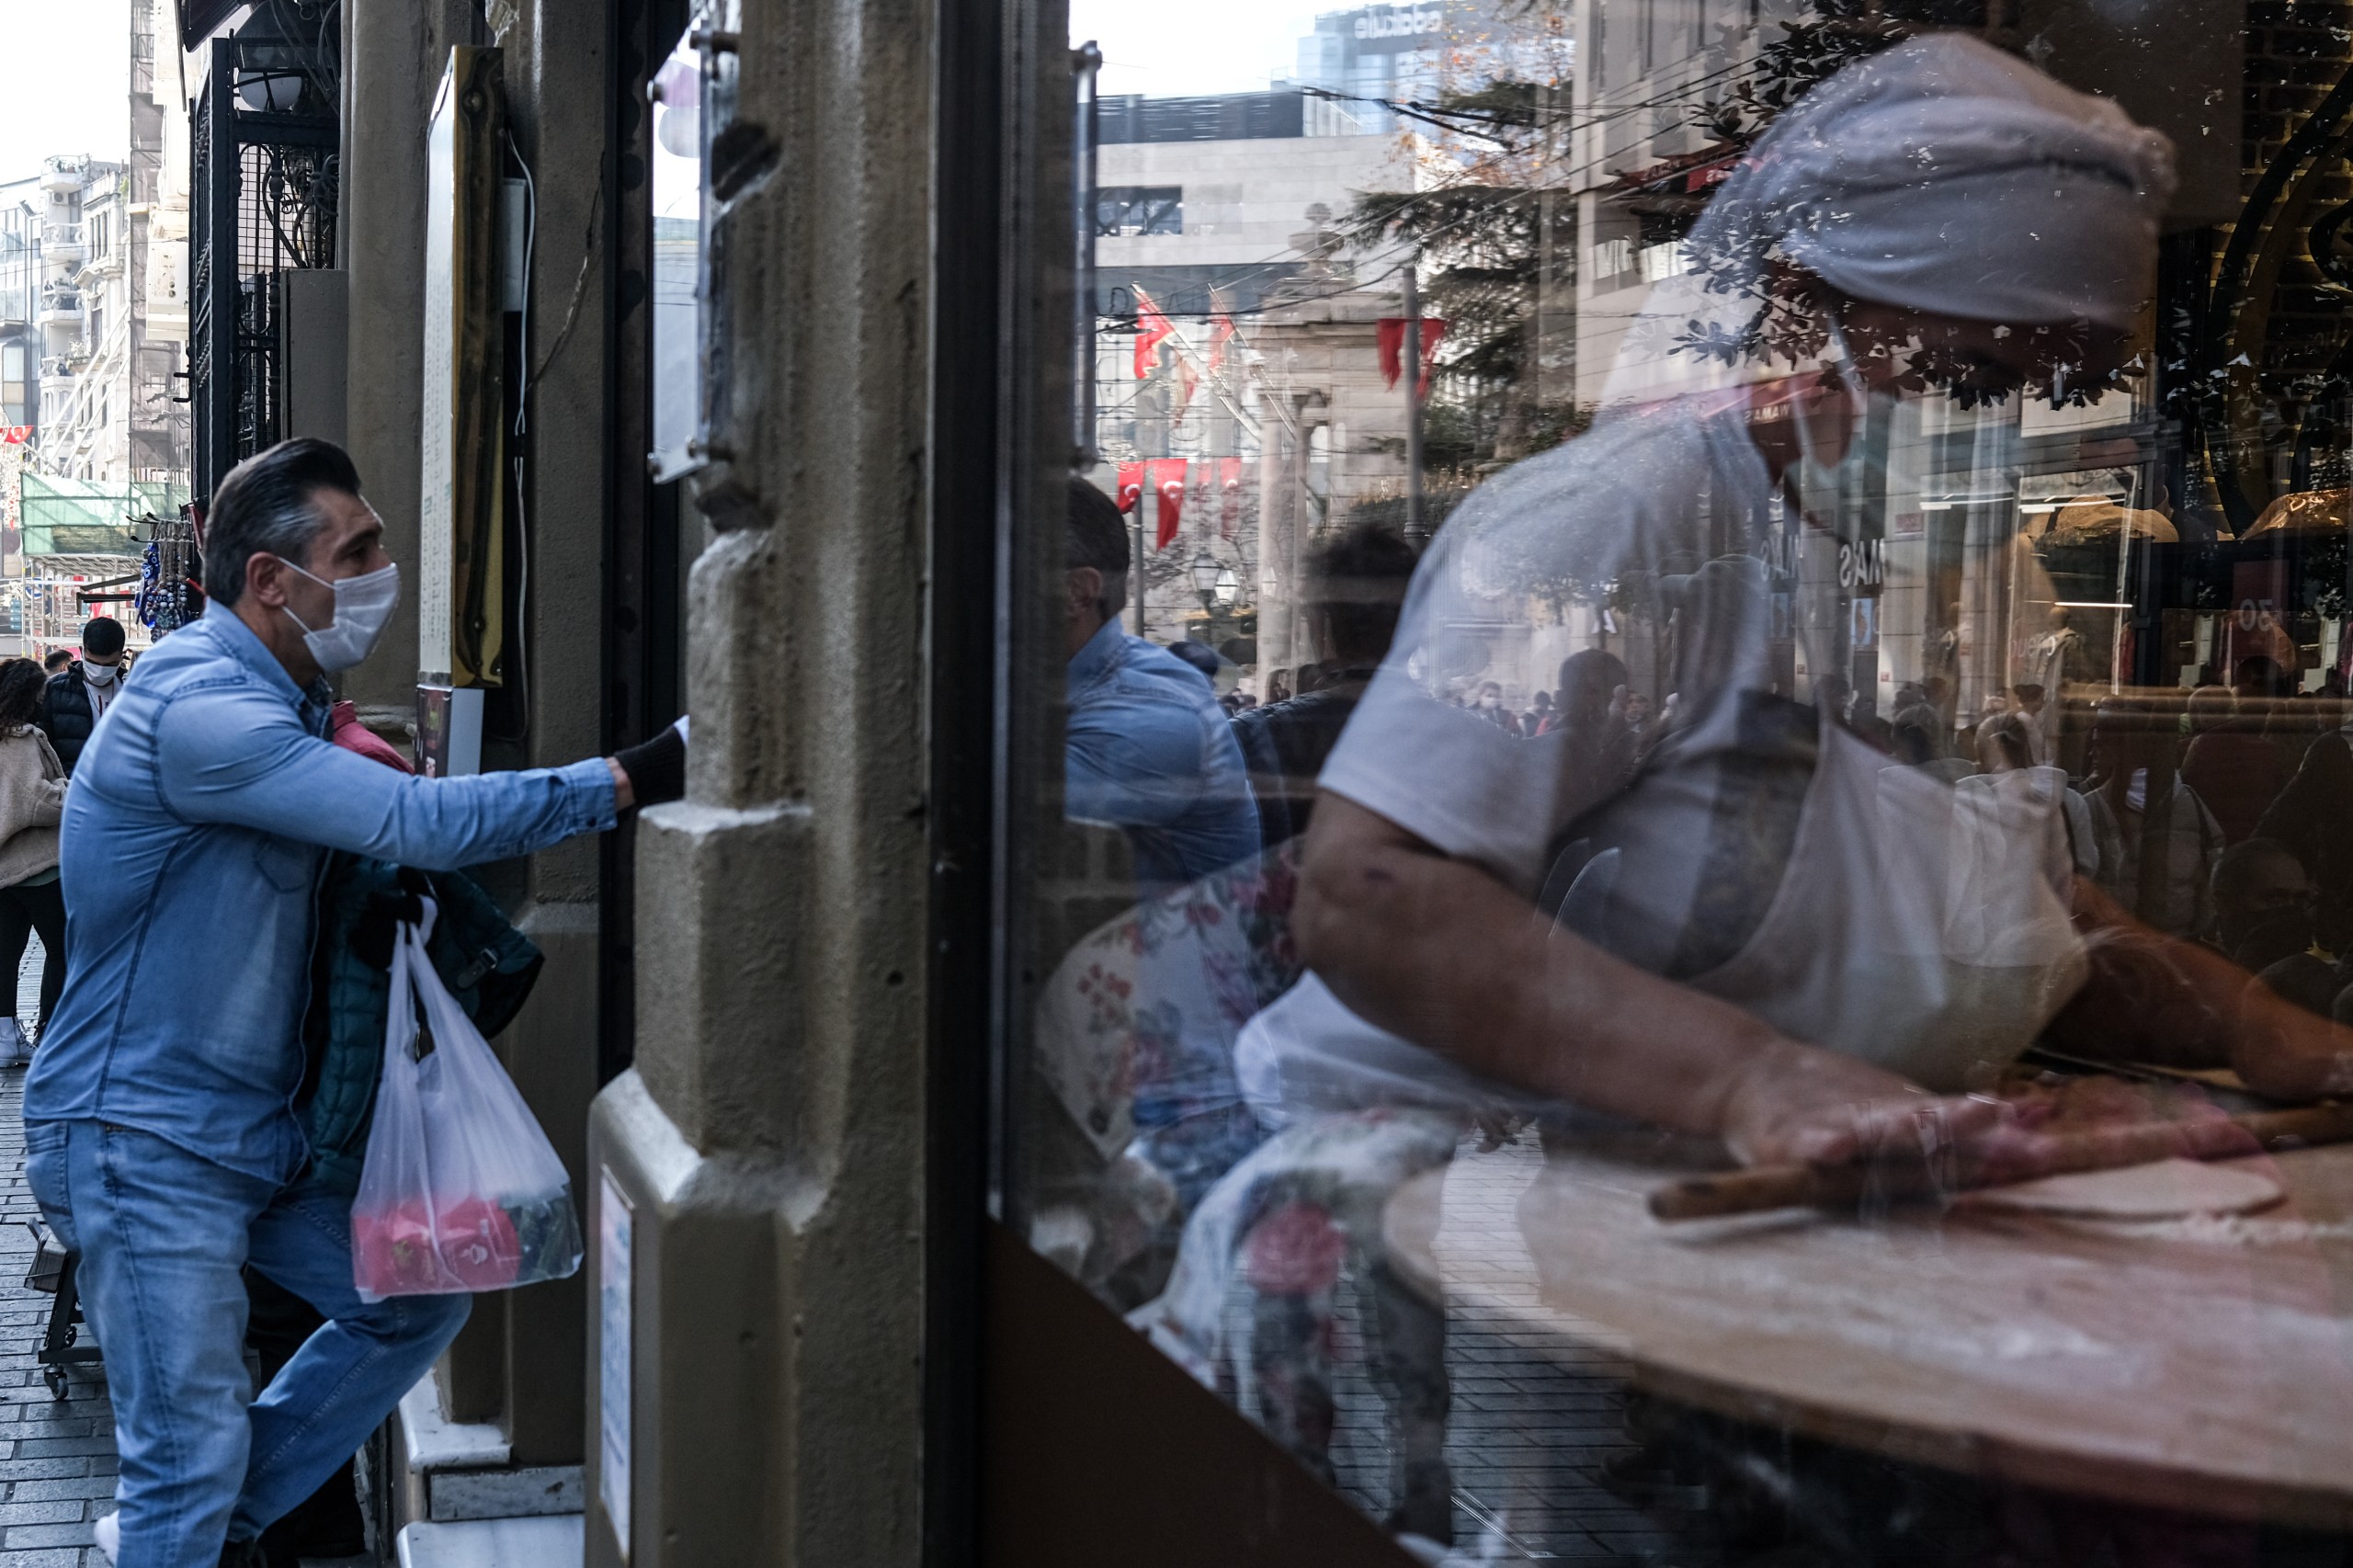 epa09668002 A woman wearing face mask (R) knits bread in Istiklal Street in Istanbul, Turkey, 05 January 2022. In Turkey, there have been 9,596,779 confirmed cases of COVID-19 with 82,795 deaths, the World Health Organization (WHO) reported. According to the weekly data of cases by provinces shared by Minister of Health Koca, the number of COVID-19 cases per 100 thousand people was 303.51 in Istanbul in the week of 18 to 24 December 2021.  EPA/SEDAT SUNA